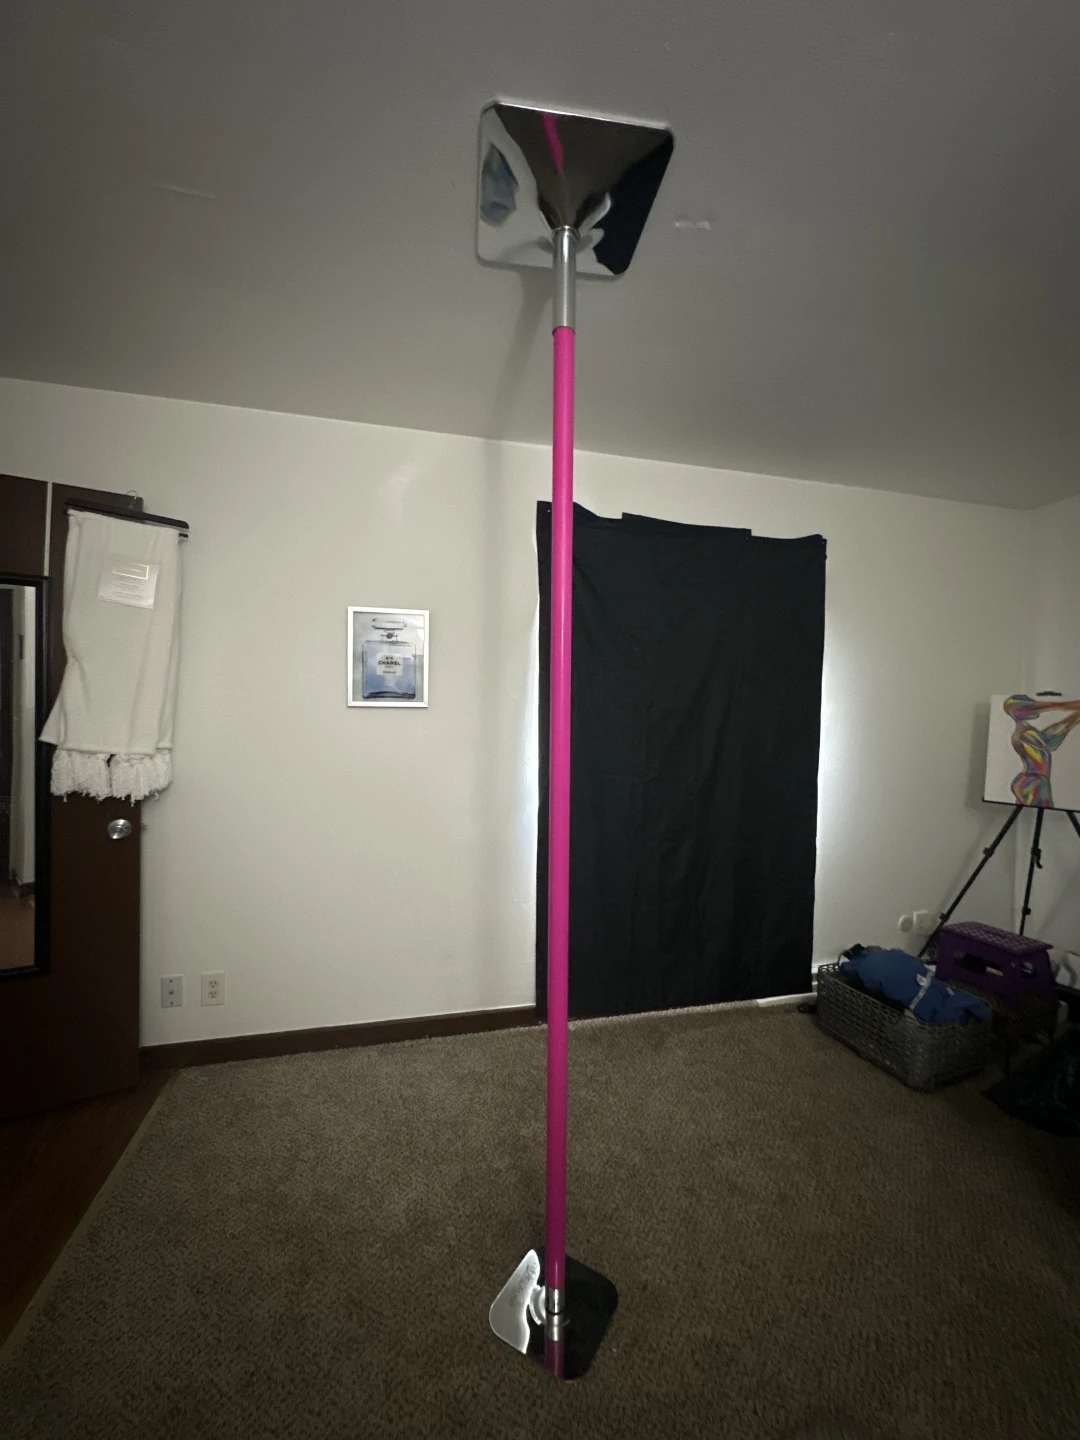 Fit 2 Flaunt Pink Silicone Portable Dance Pole Kit